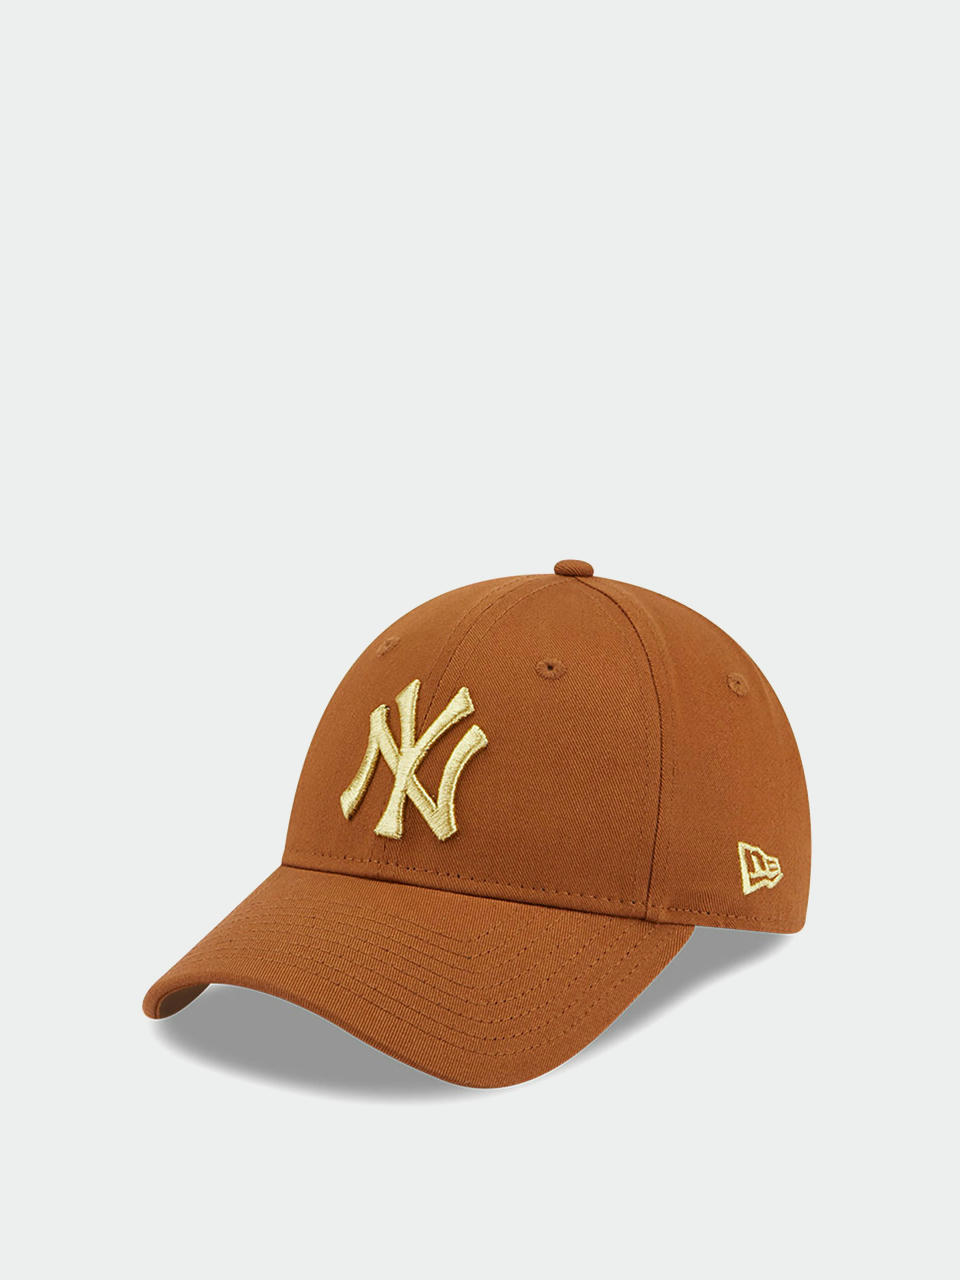 Casquette Wmn Cord NY 940 offwhite toffee